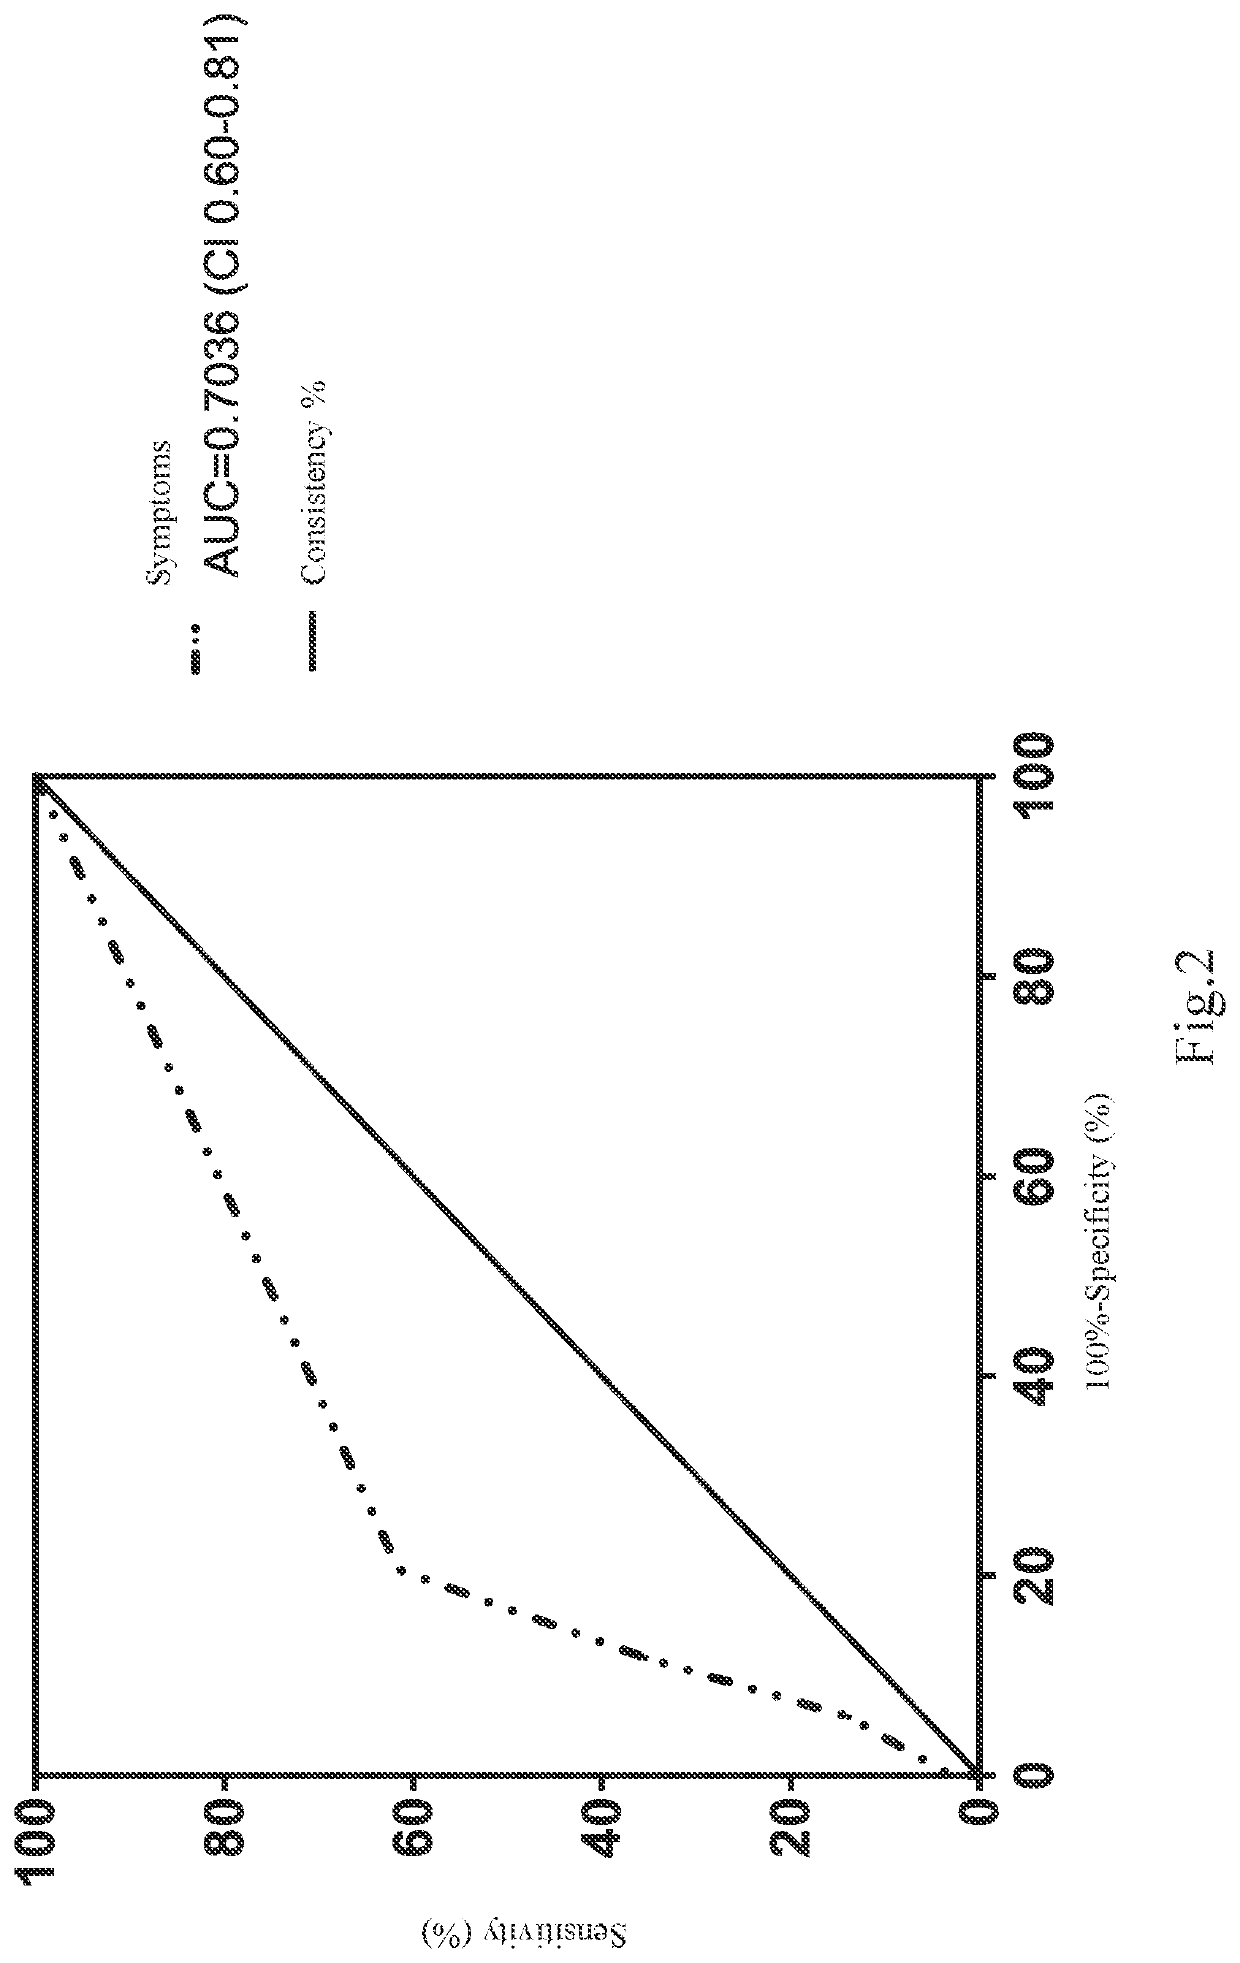 Method of elevating prediction accuracy of grouping subjects with severe dengue infection